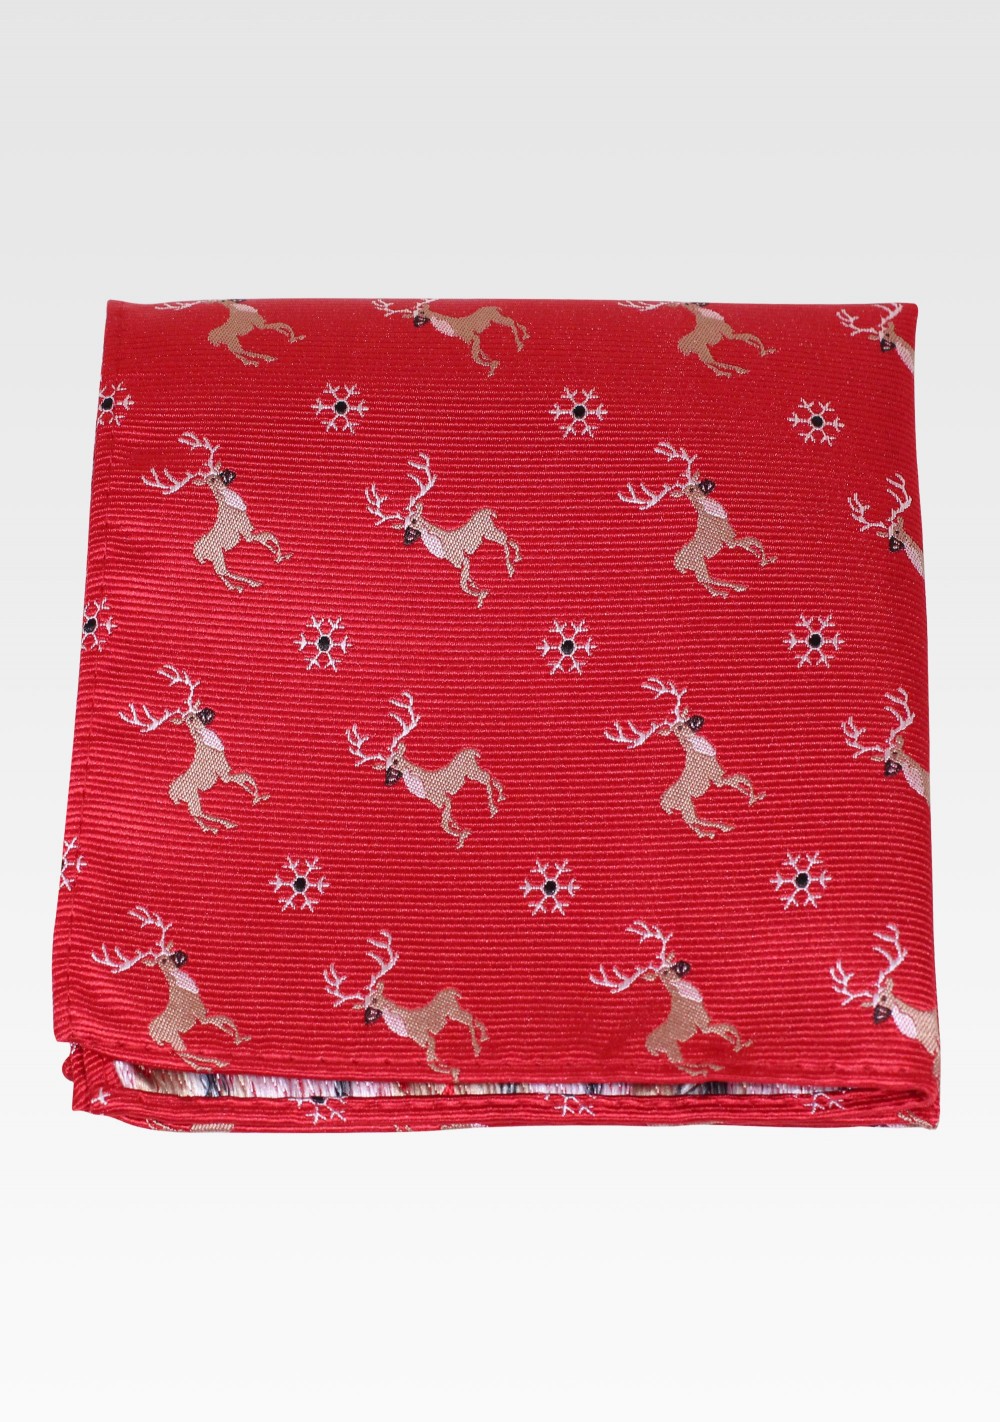 Red Hanky with Embroidered Reindeer